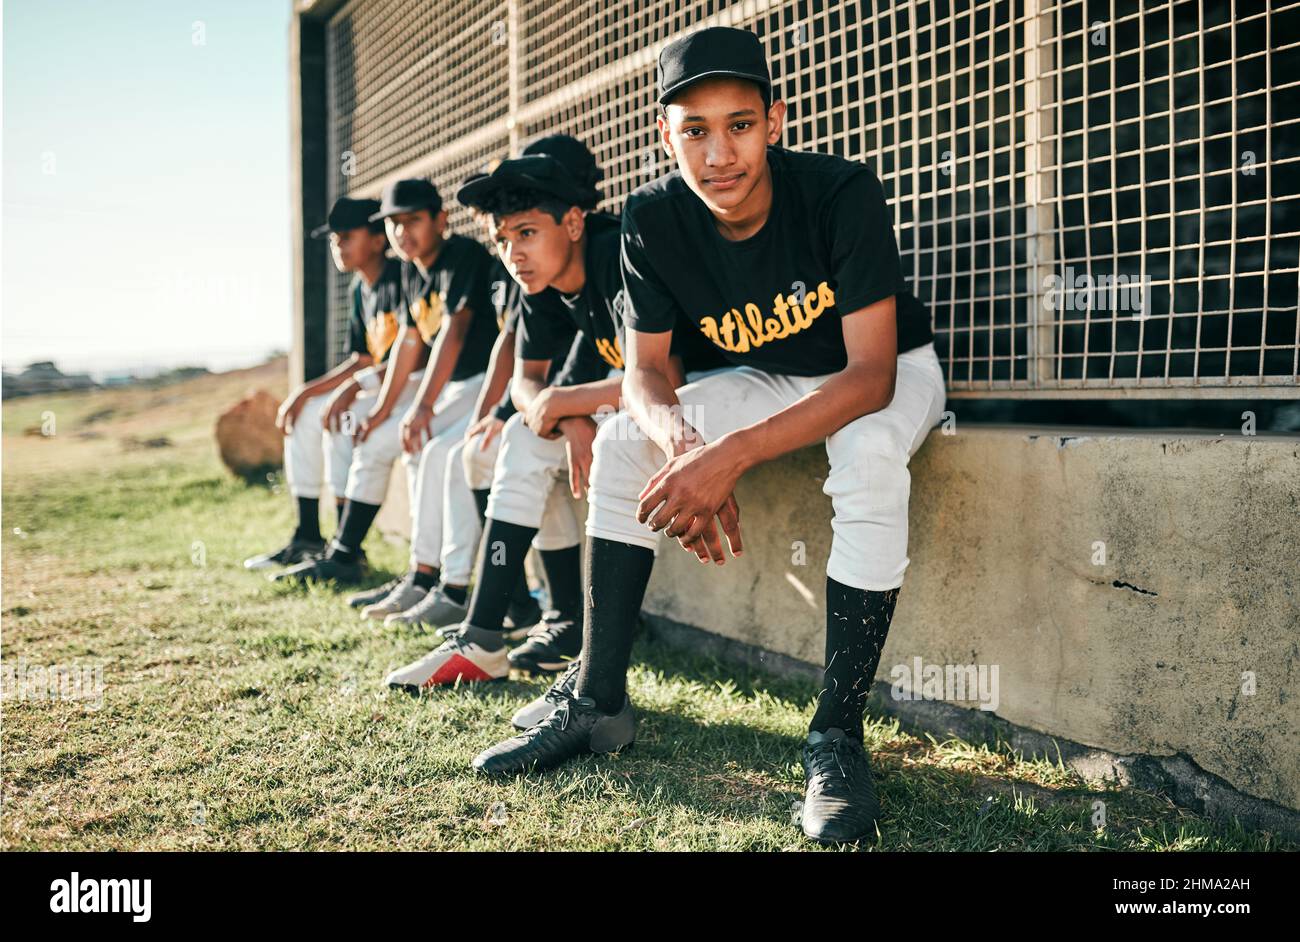 I wouldnt want to be anywhere else. Shot of a group of baseball players sitting together on a field. Stock Photo